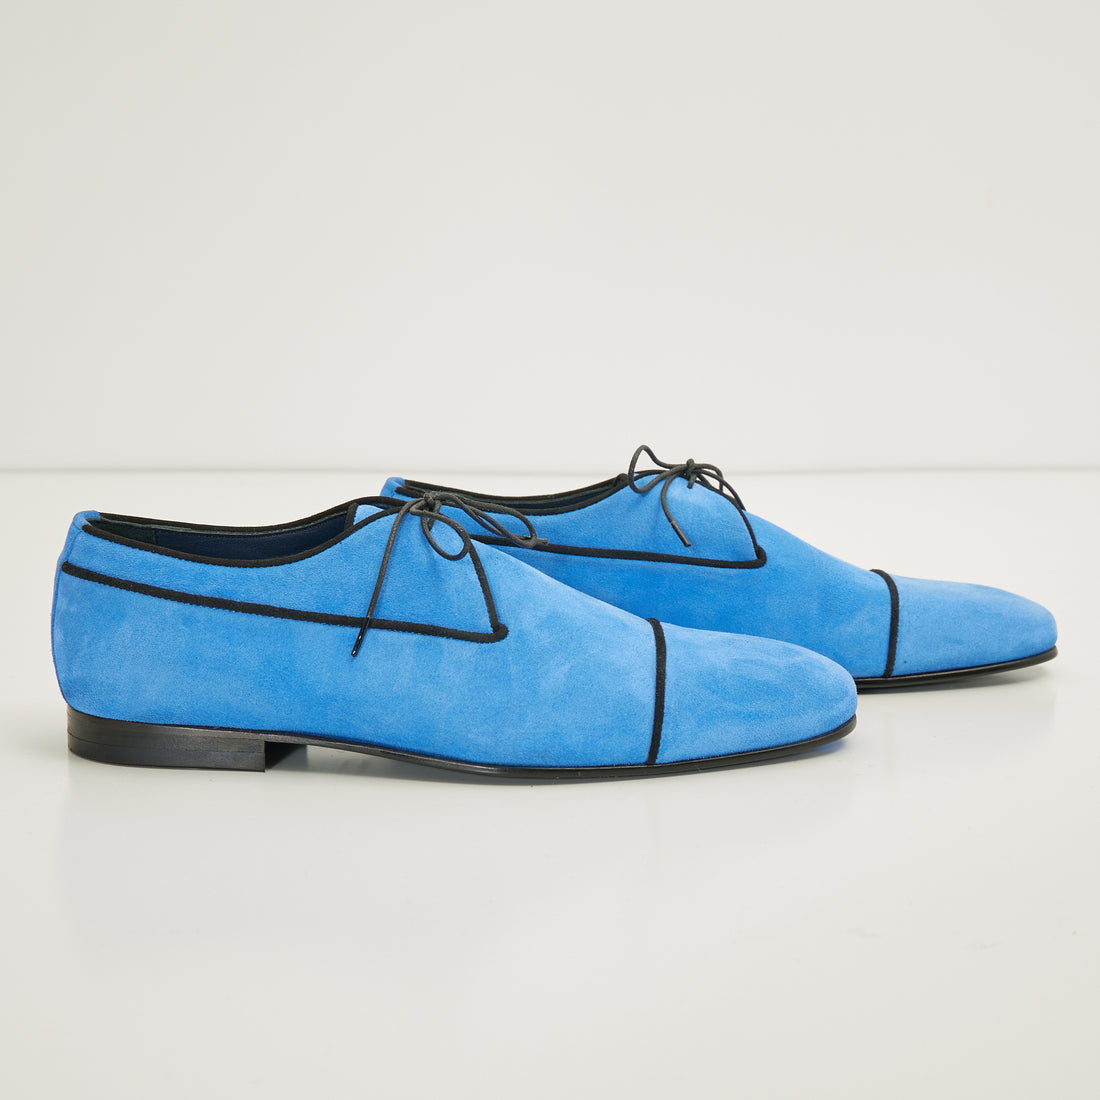 N° D1016 THE FORMAL LEATHER CAP TOE DERBY SHOES  - SKY BLUE SUEDE